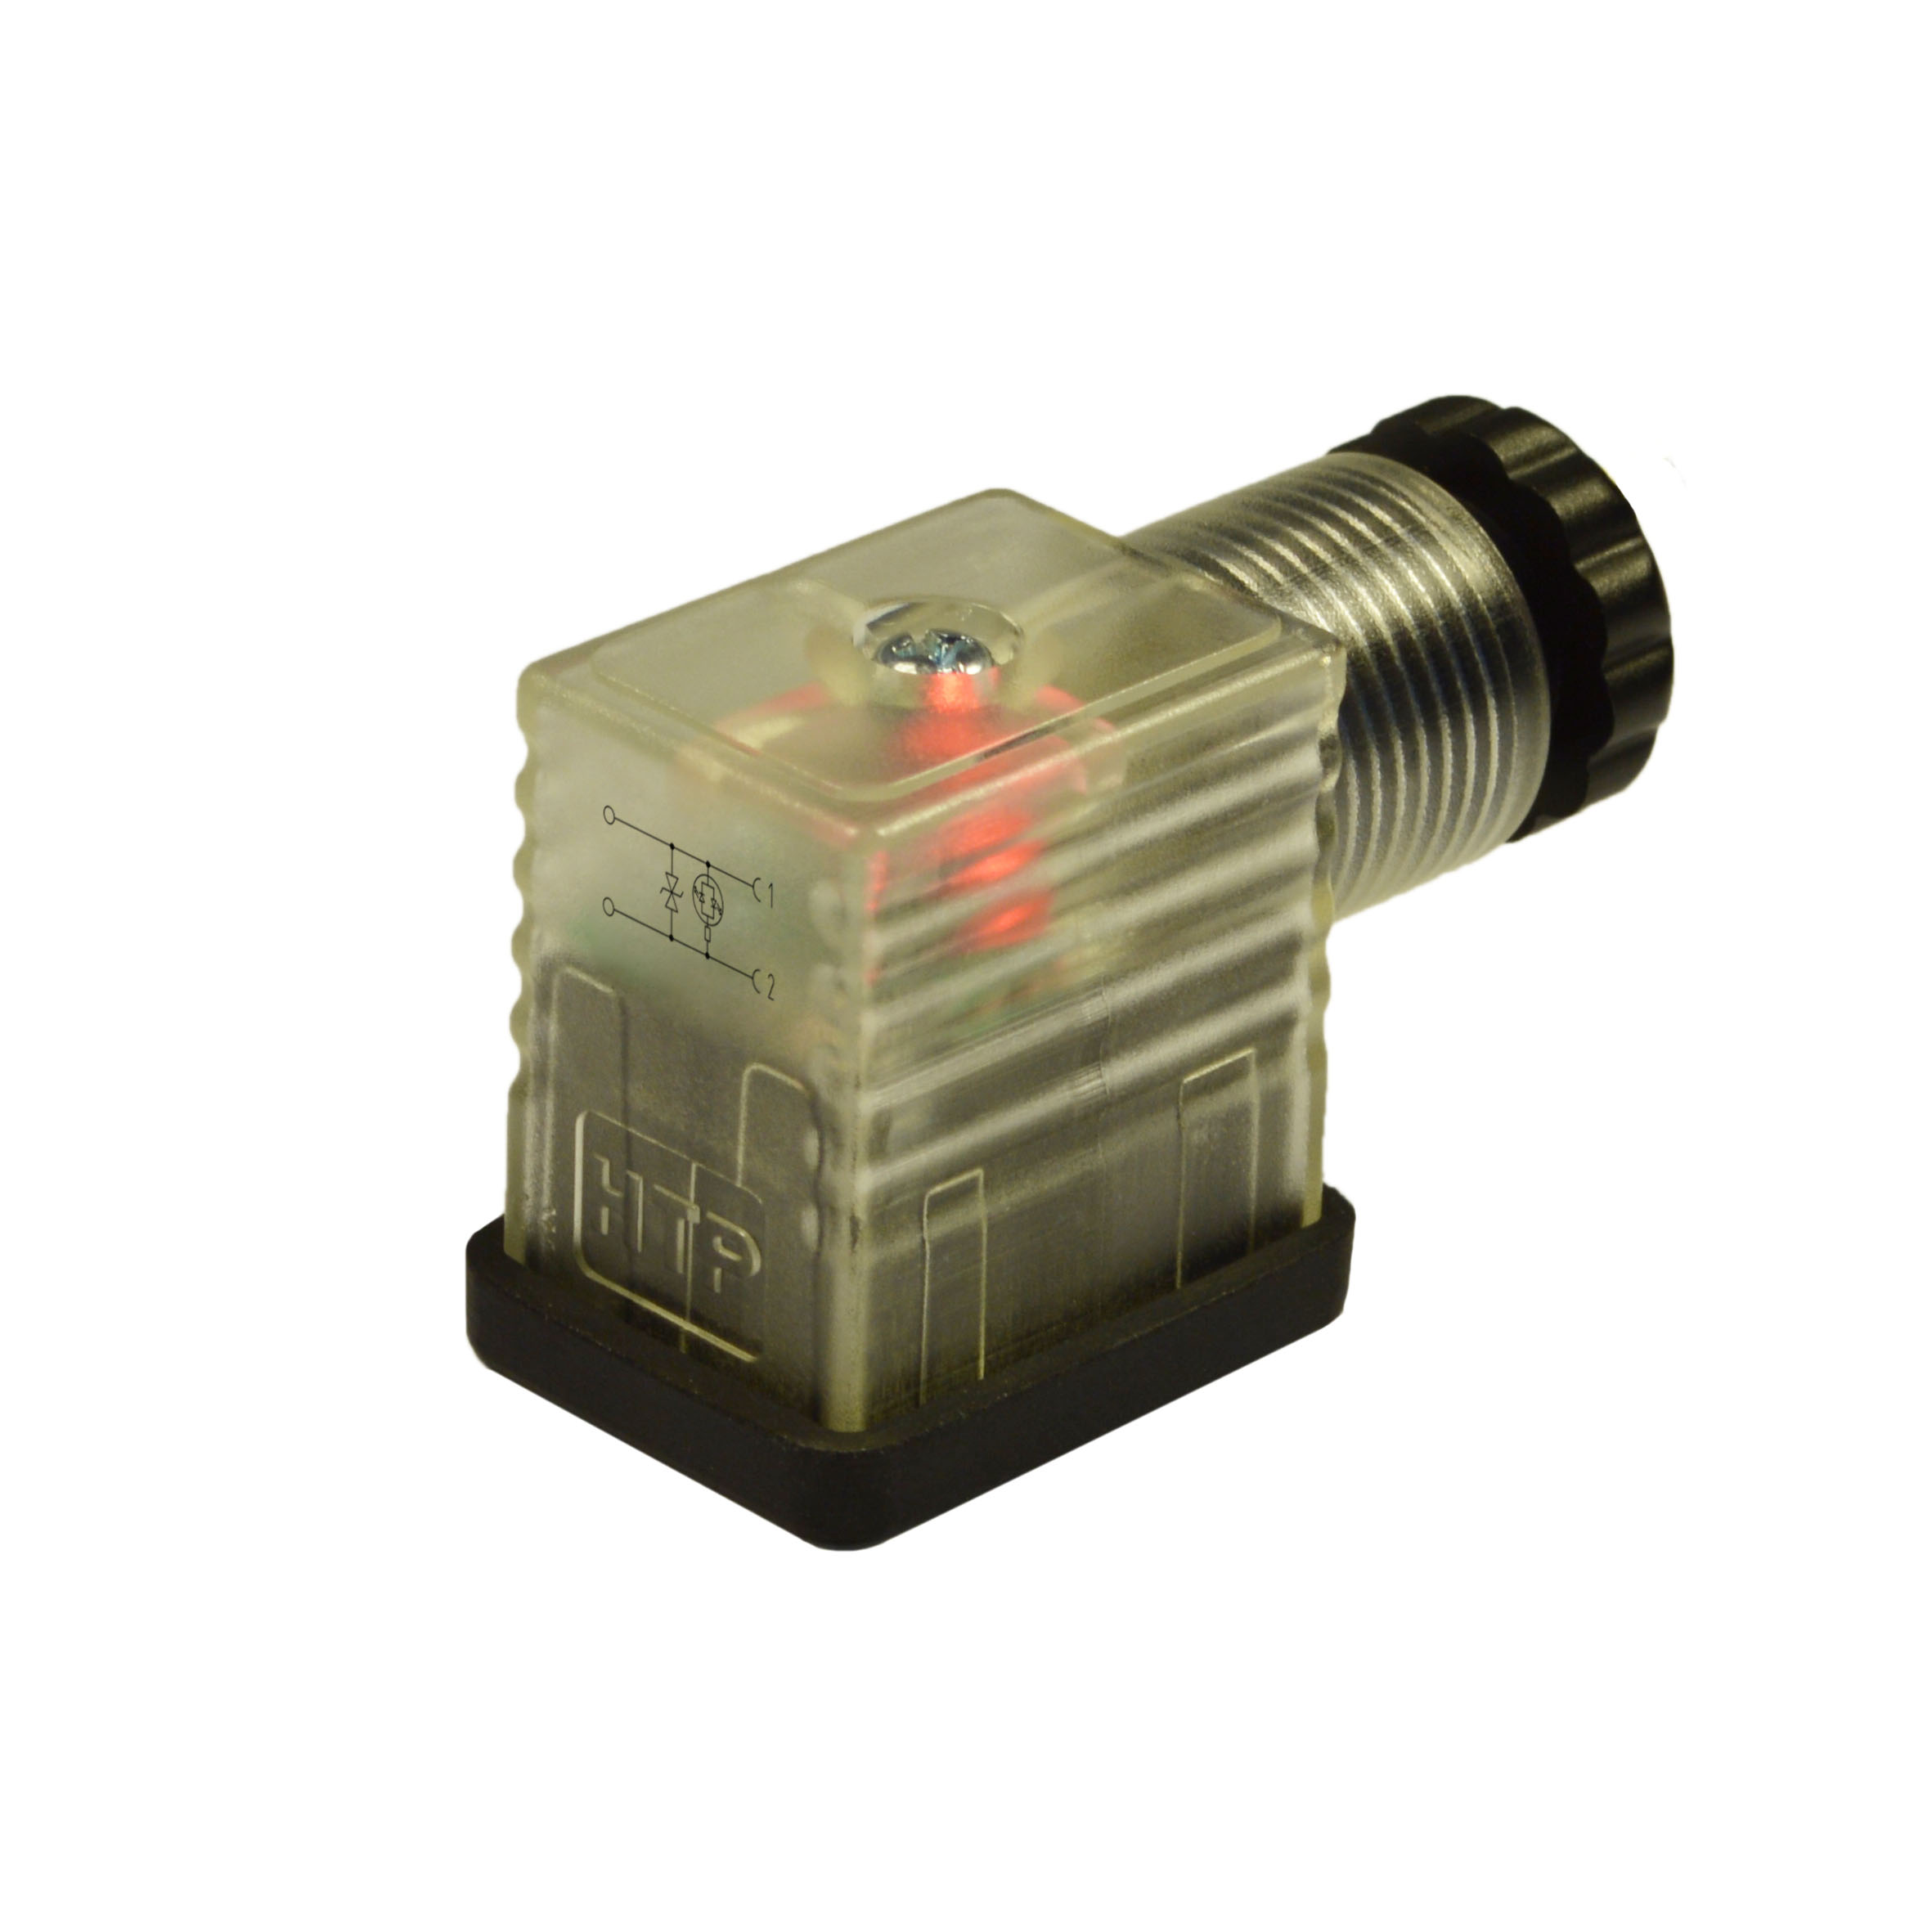 Industrial standard(typeB)field attachable,2p+PE(h.12),red LED+transient,24VAC/DC,PG9